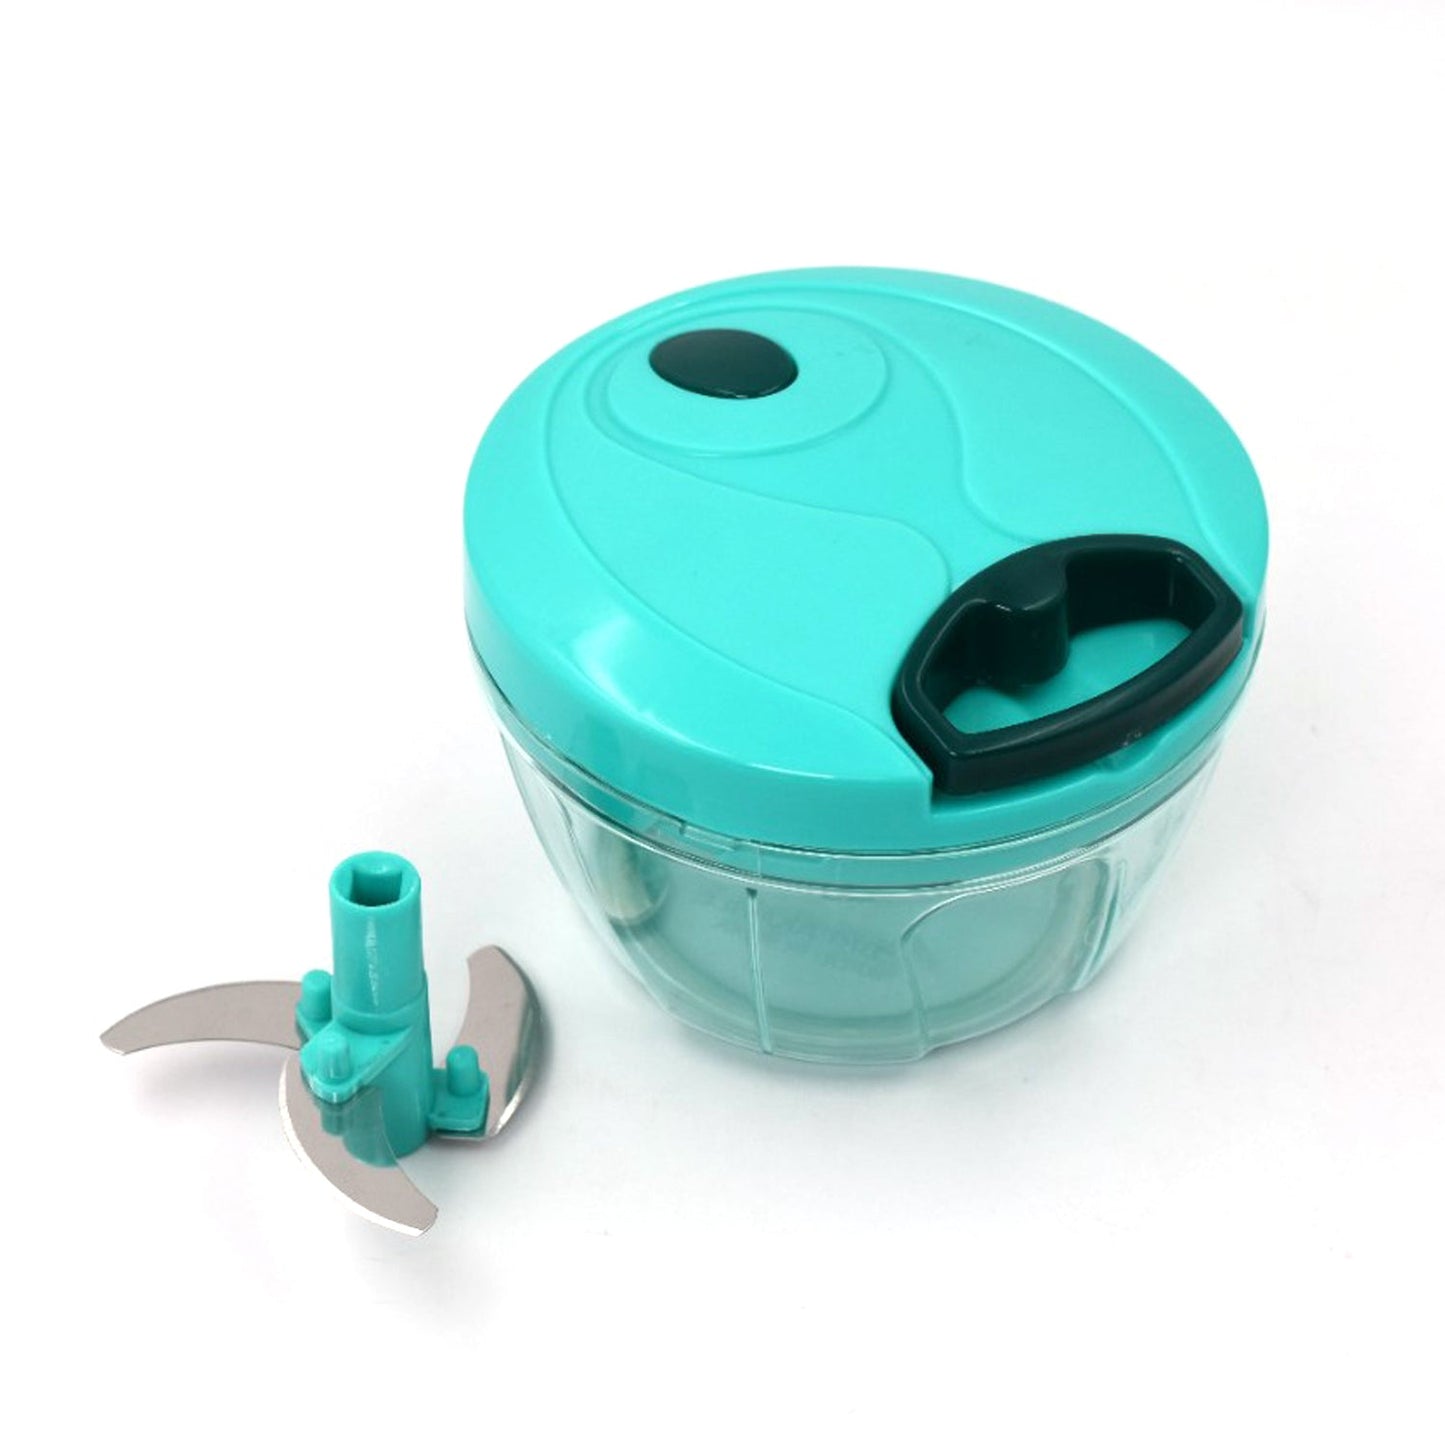 5959  Handy Mini Plastic Vegetable Chopper Cutter, Onion Chopper Vegetables for Kitchen Accessories with 3 Blades